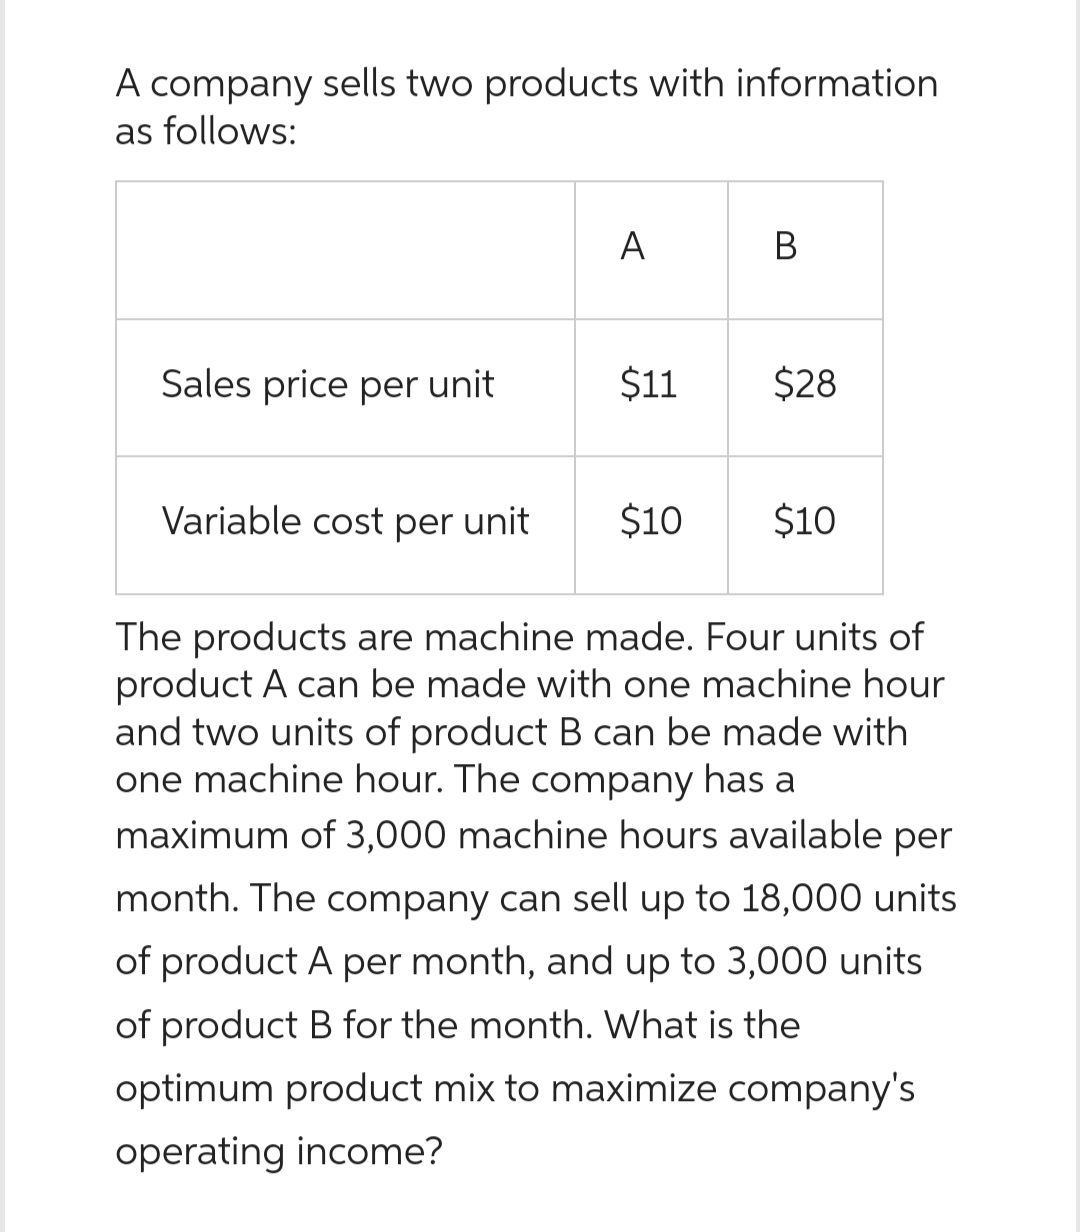 A company sells two products with information
as follows:
Sales price per unit
Variable cost per unit
A
$11
$10
B
$28
$10
The products are machine made. Four units of
product A can be made with one machine hour
and two units of product B can be made with
one machine hour. The company has a
maximum of 3,000 machine hours available per
month. The company can sell up to 18,000 units
of product A per month, and up to 3,000 units
of product B for the month. What is the
optimum product mix to maximize company's
operating income?